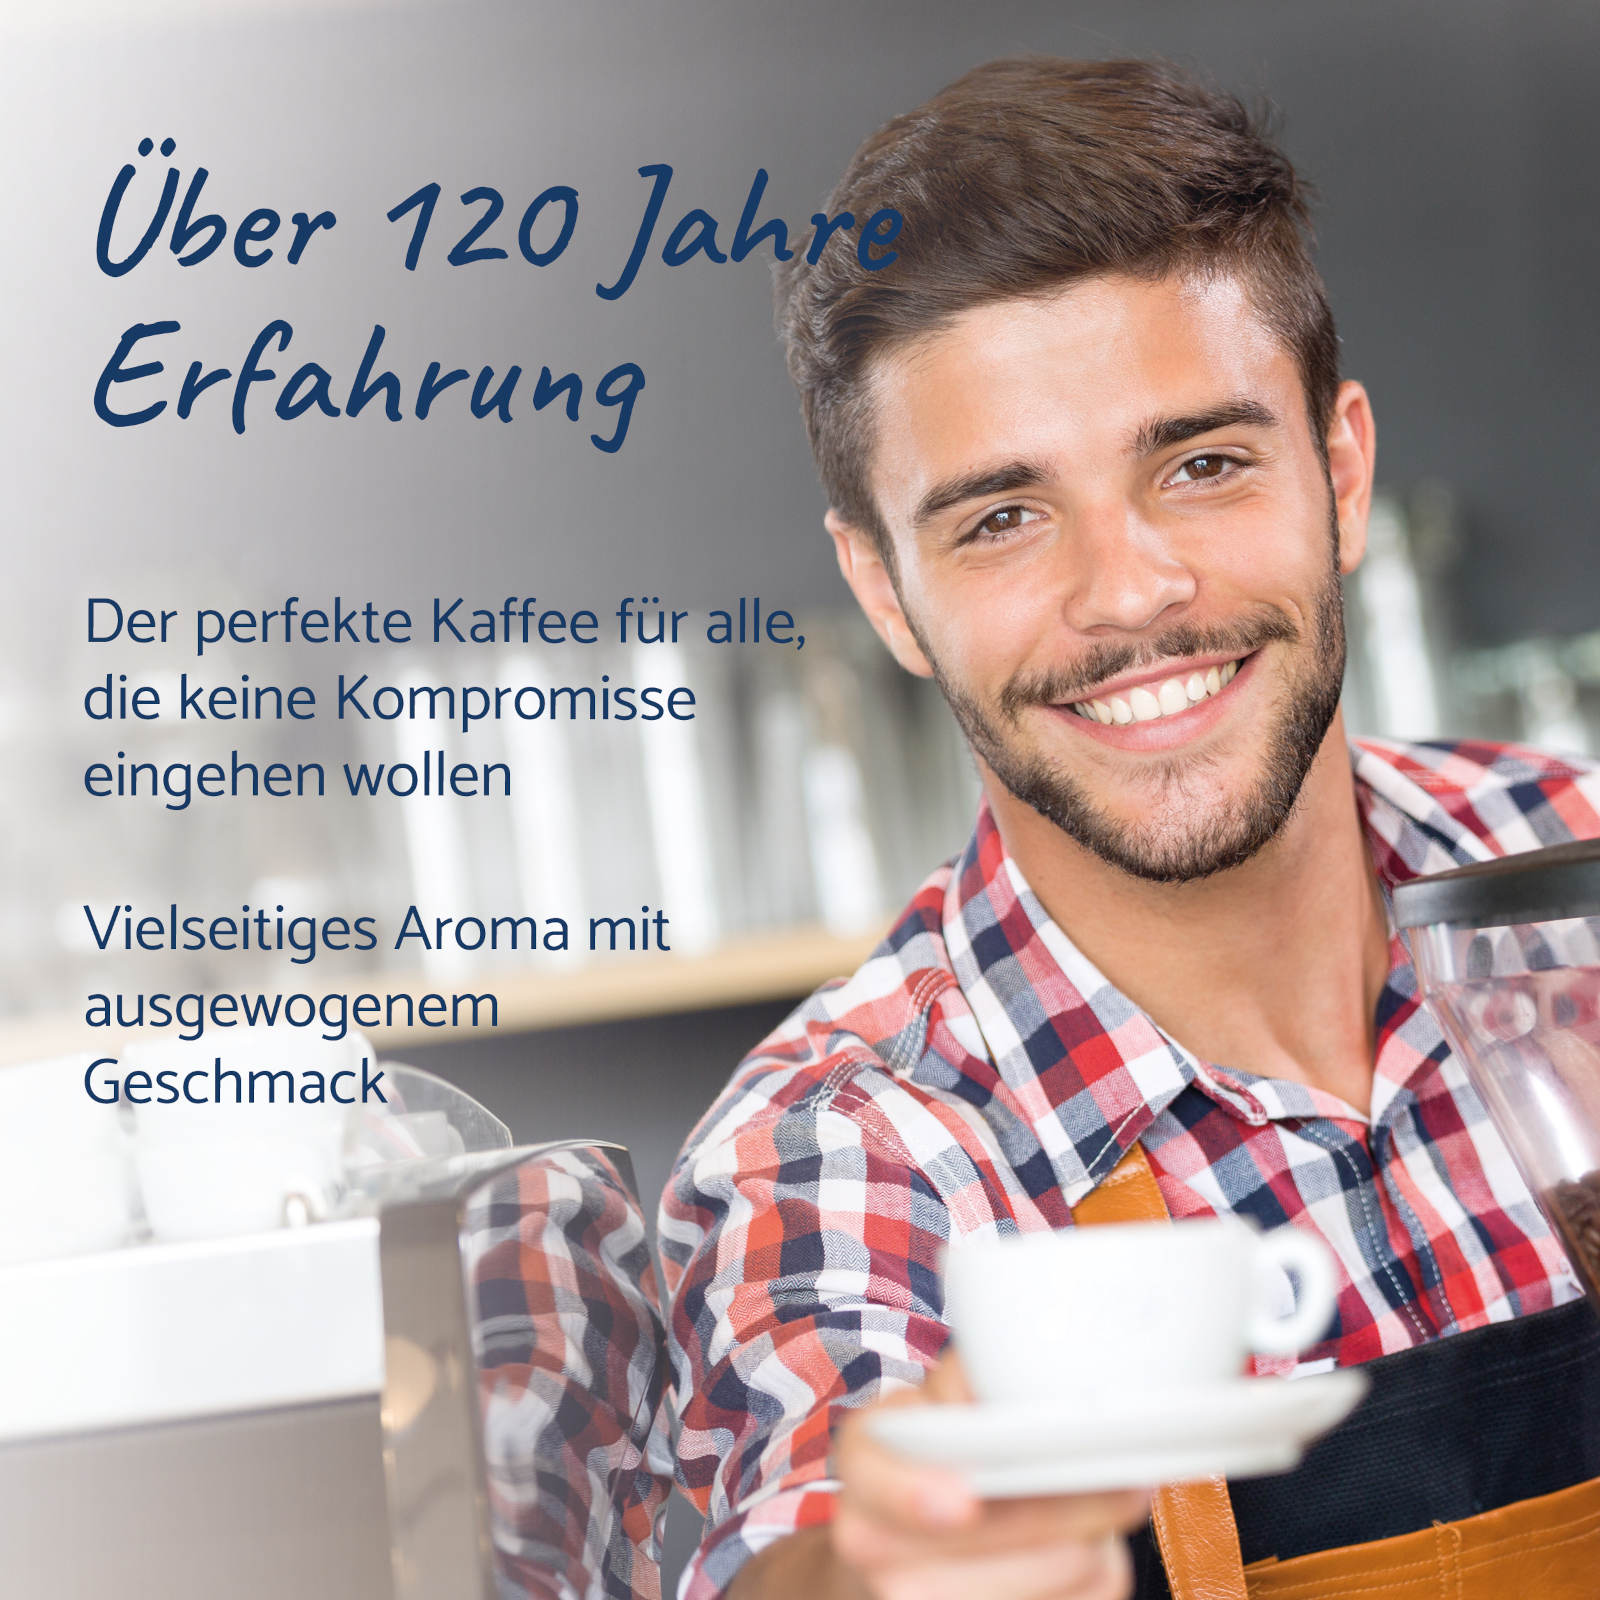 HOUSE Instantkaffee JACOBS MAXWELL MAX